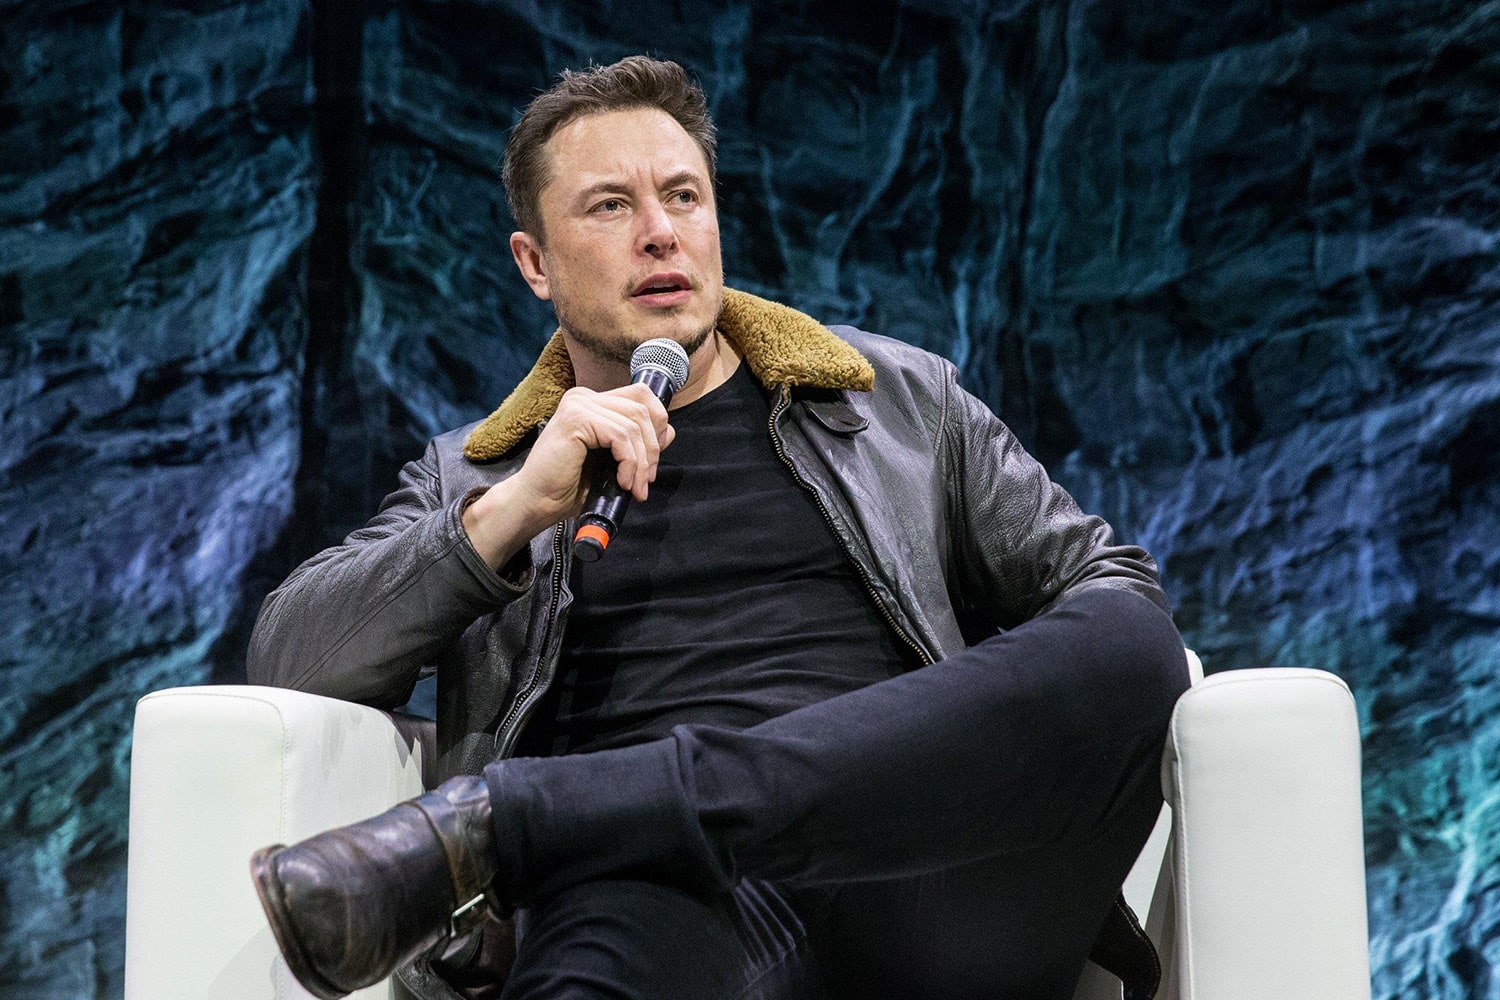 elon 1 - Financial Futurism - Elon Musk discloses Tesla stock gift to charity worth about $2 billion. Last year, his donations all went to his own foundation. - Stock